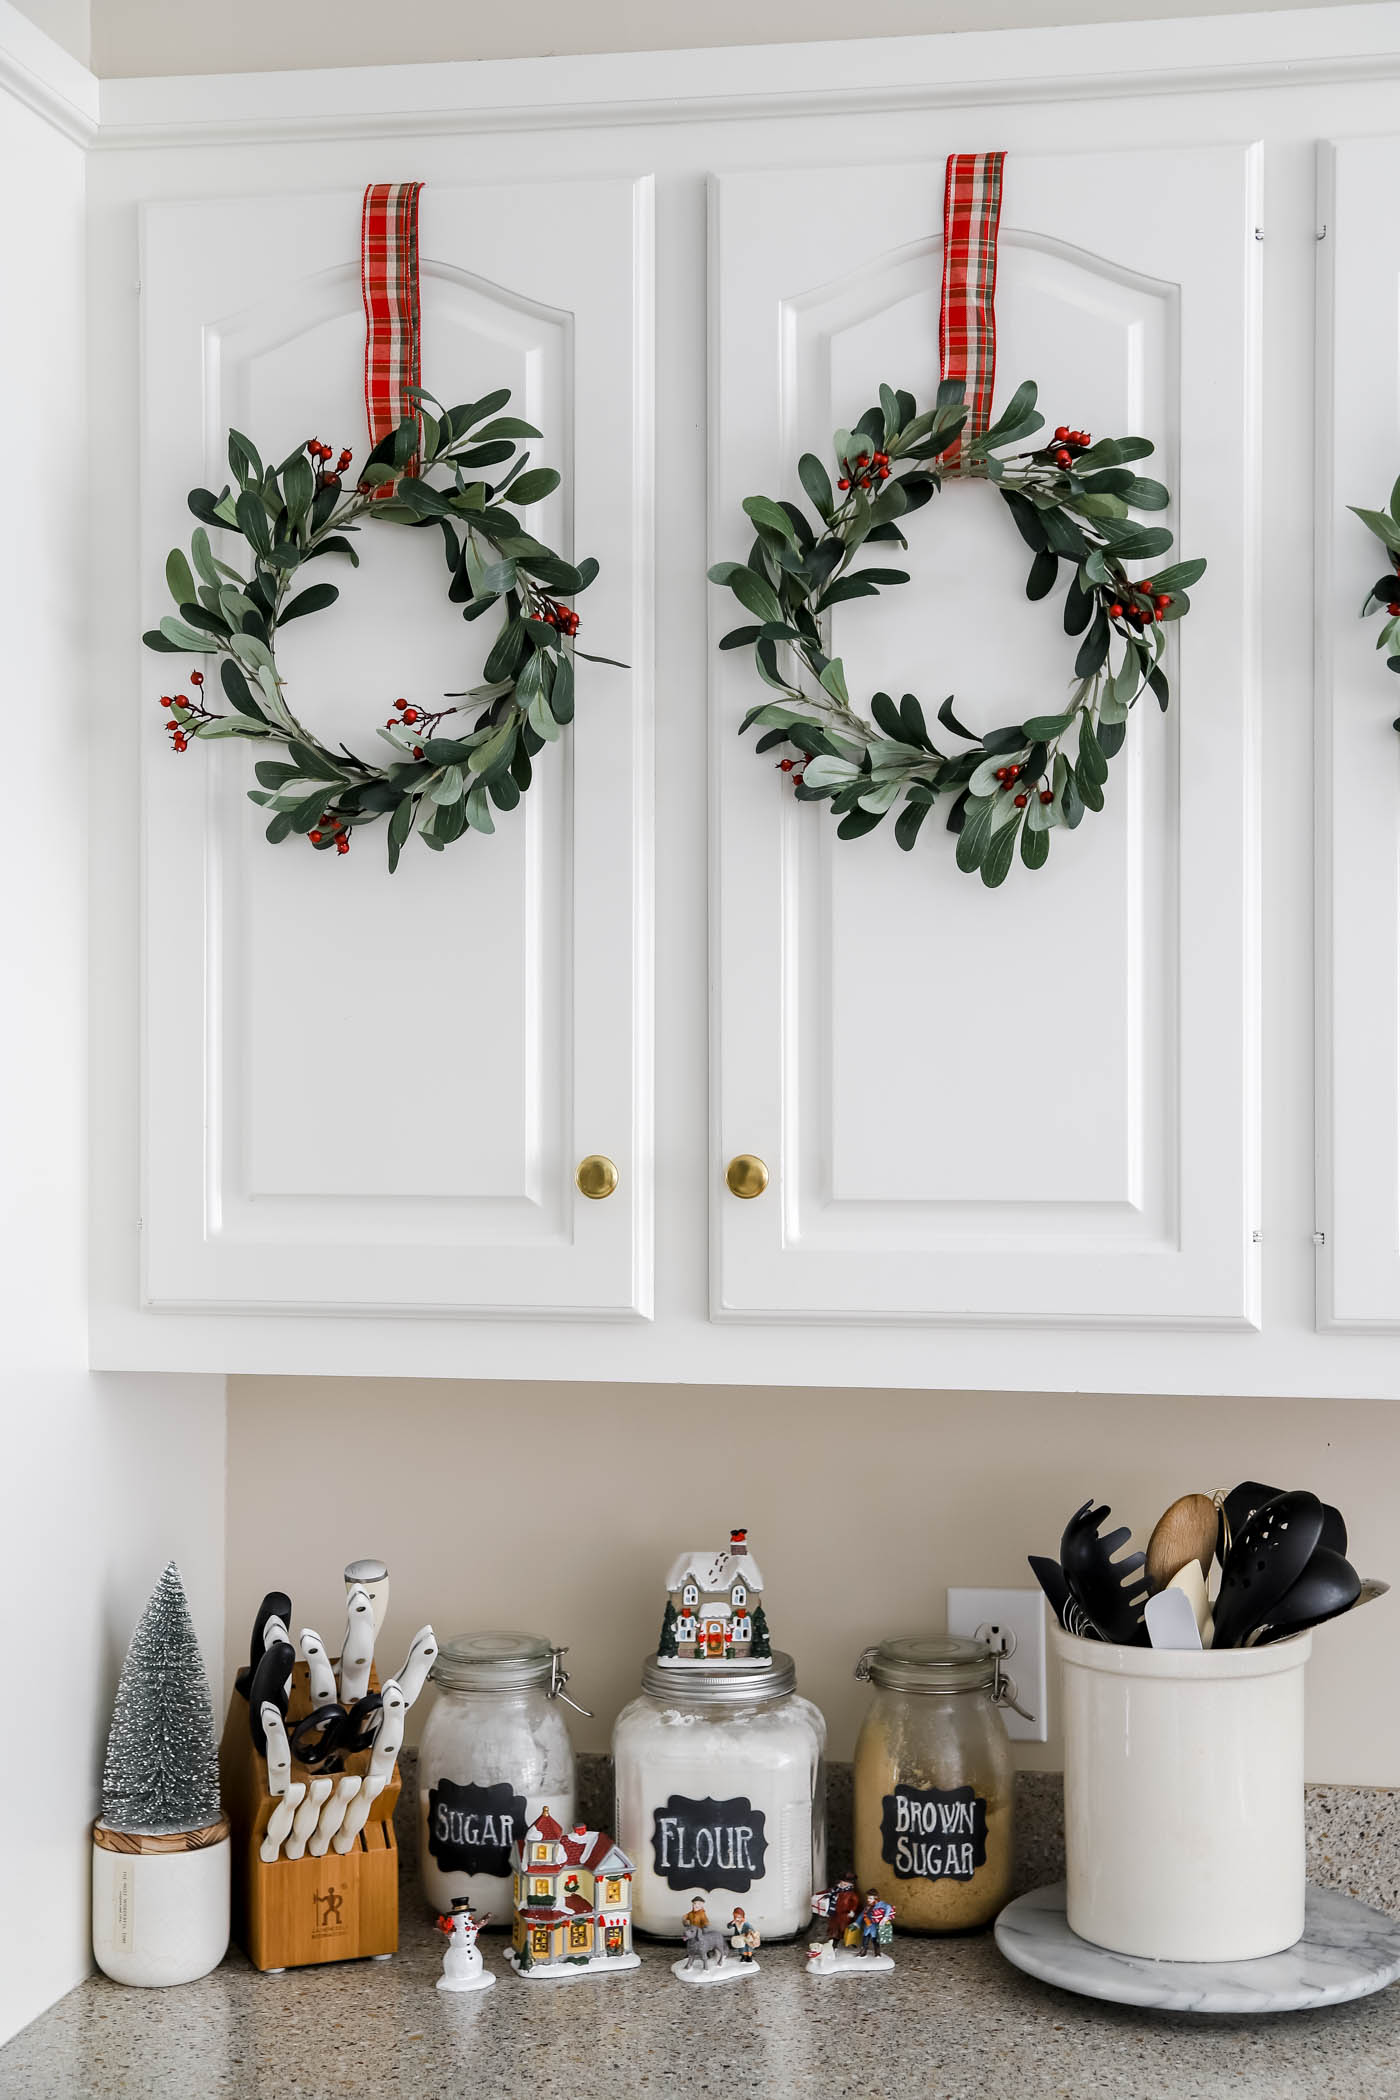 How To Display Kitchen Cabinet Wreaths